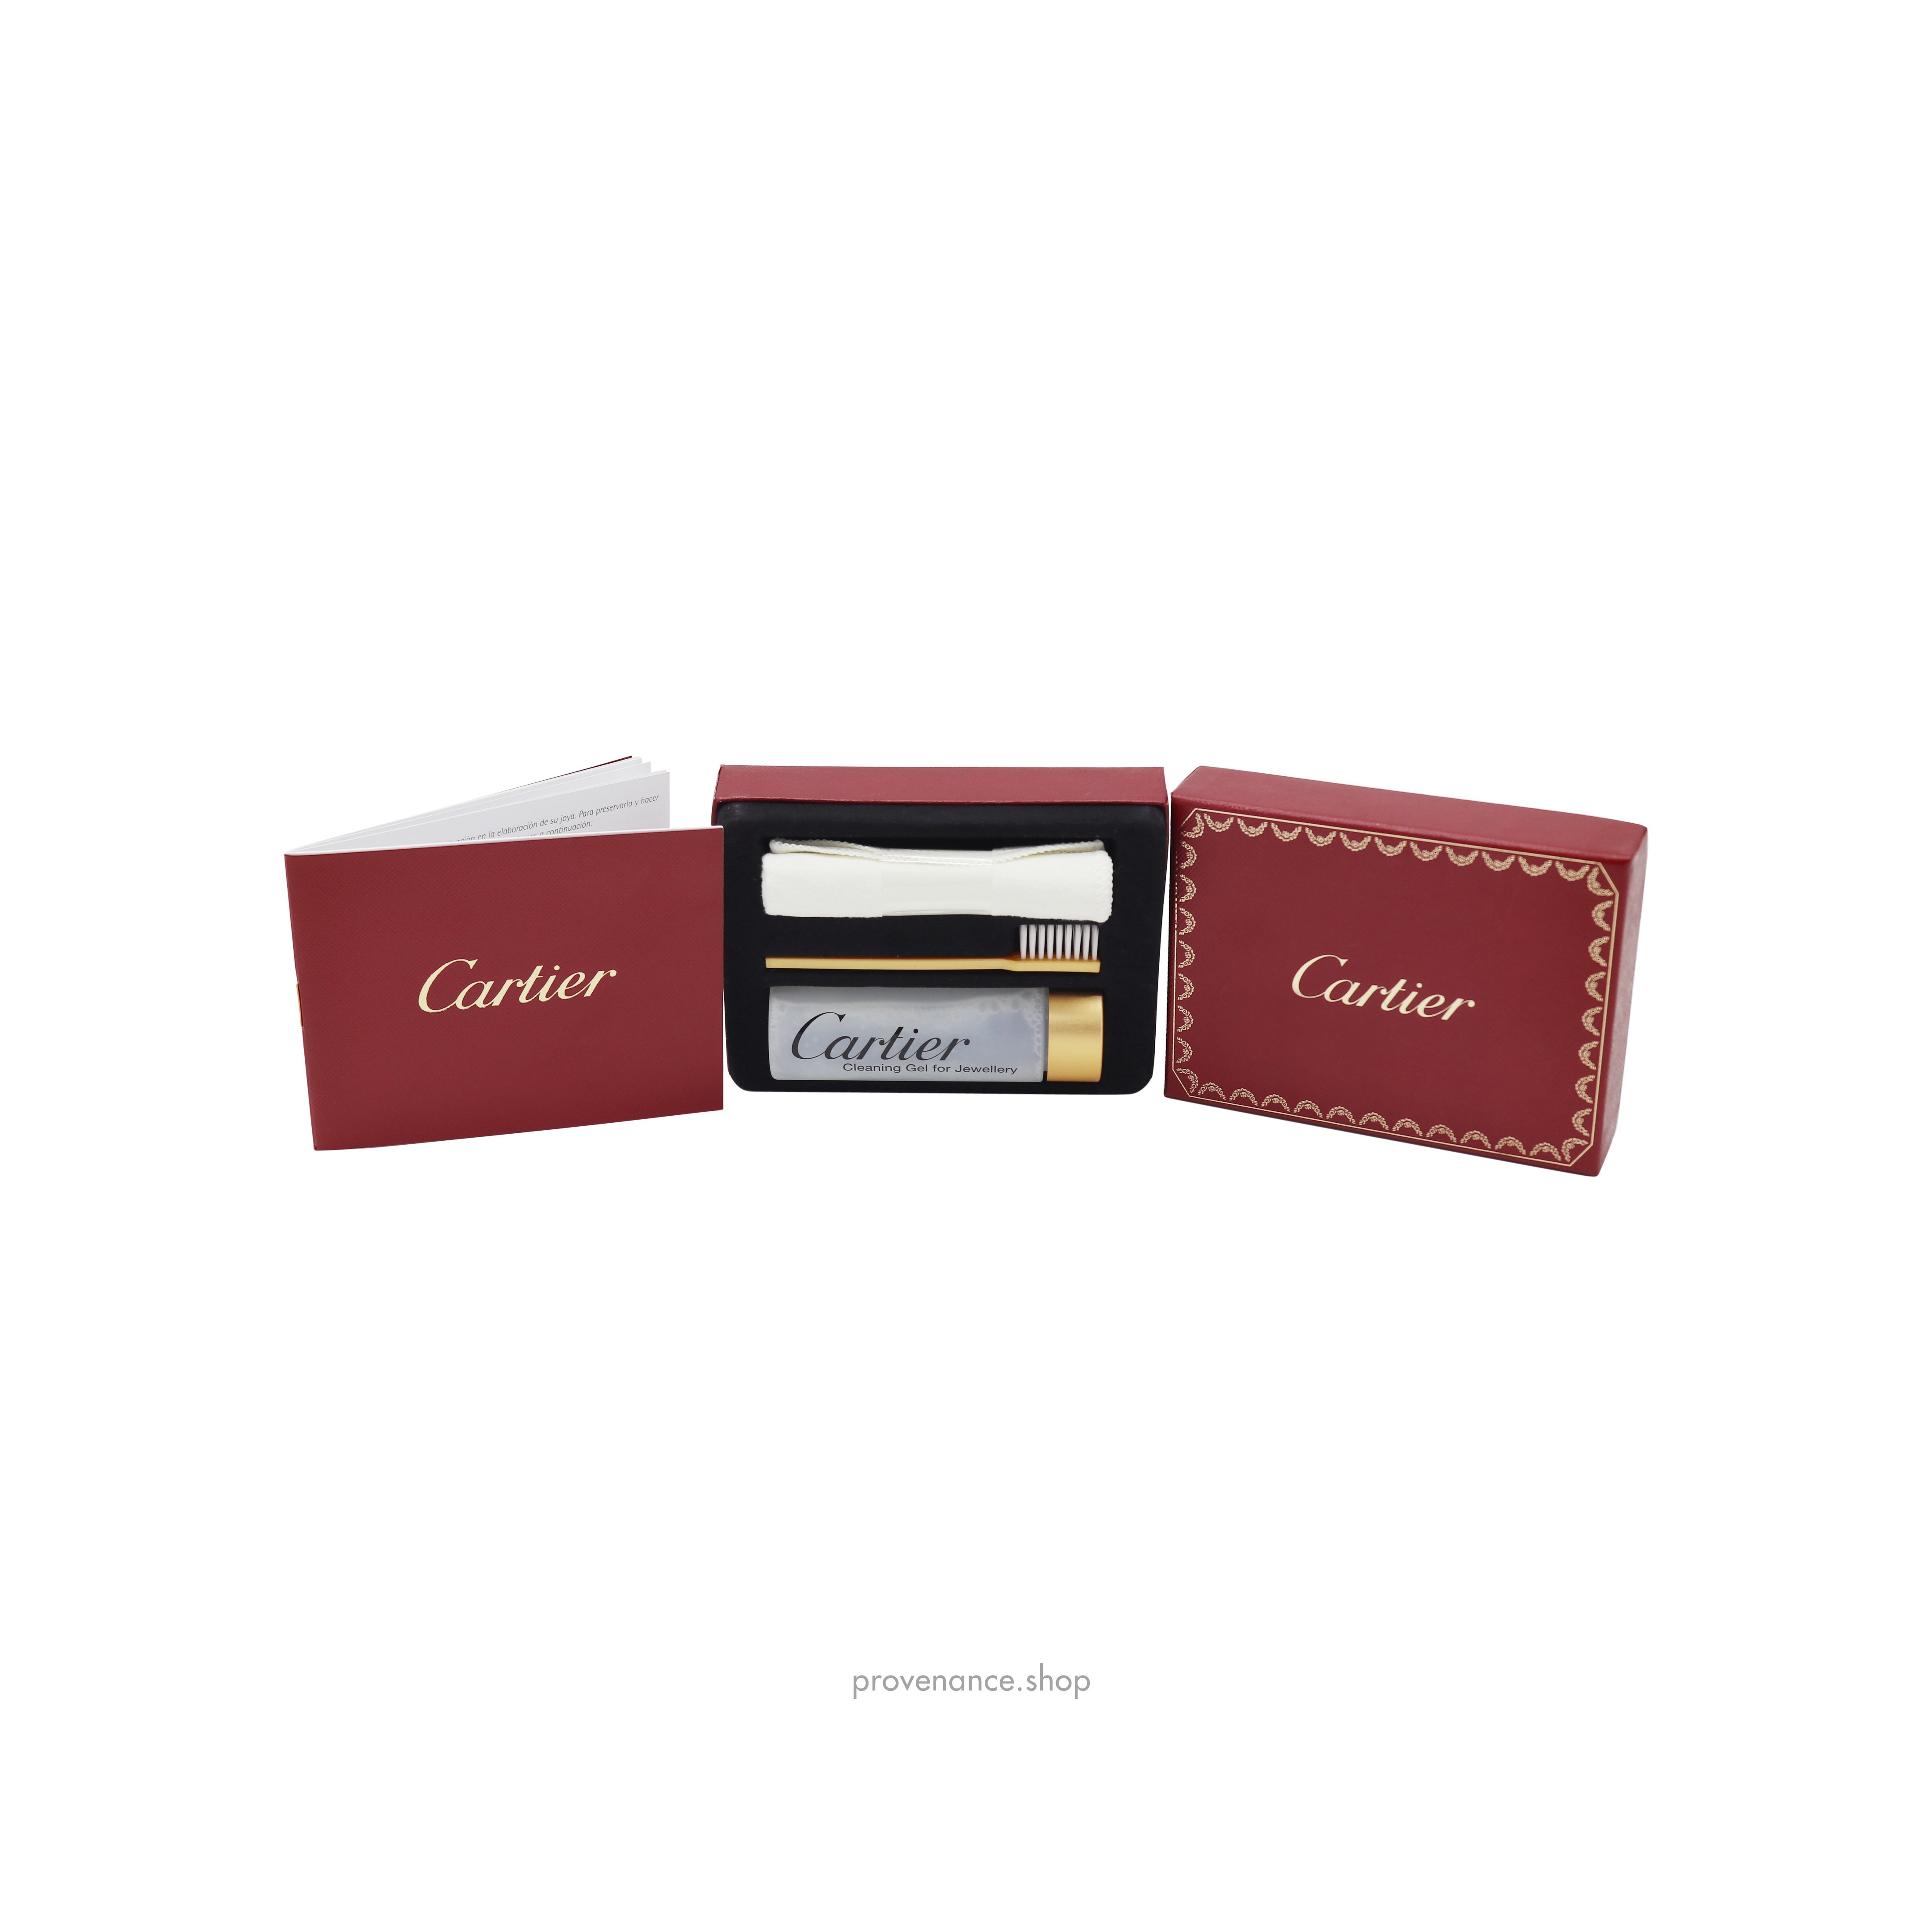 Cartier Jewelry Cleaning Kit - 1